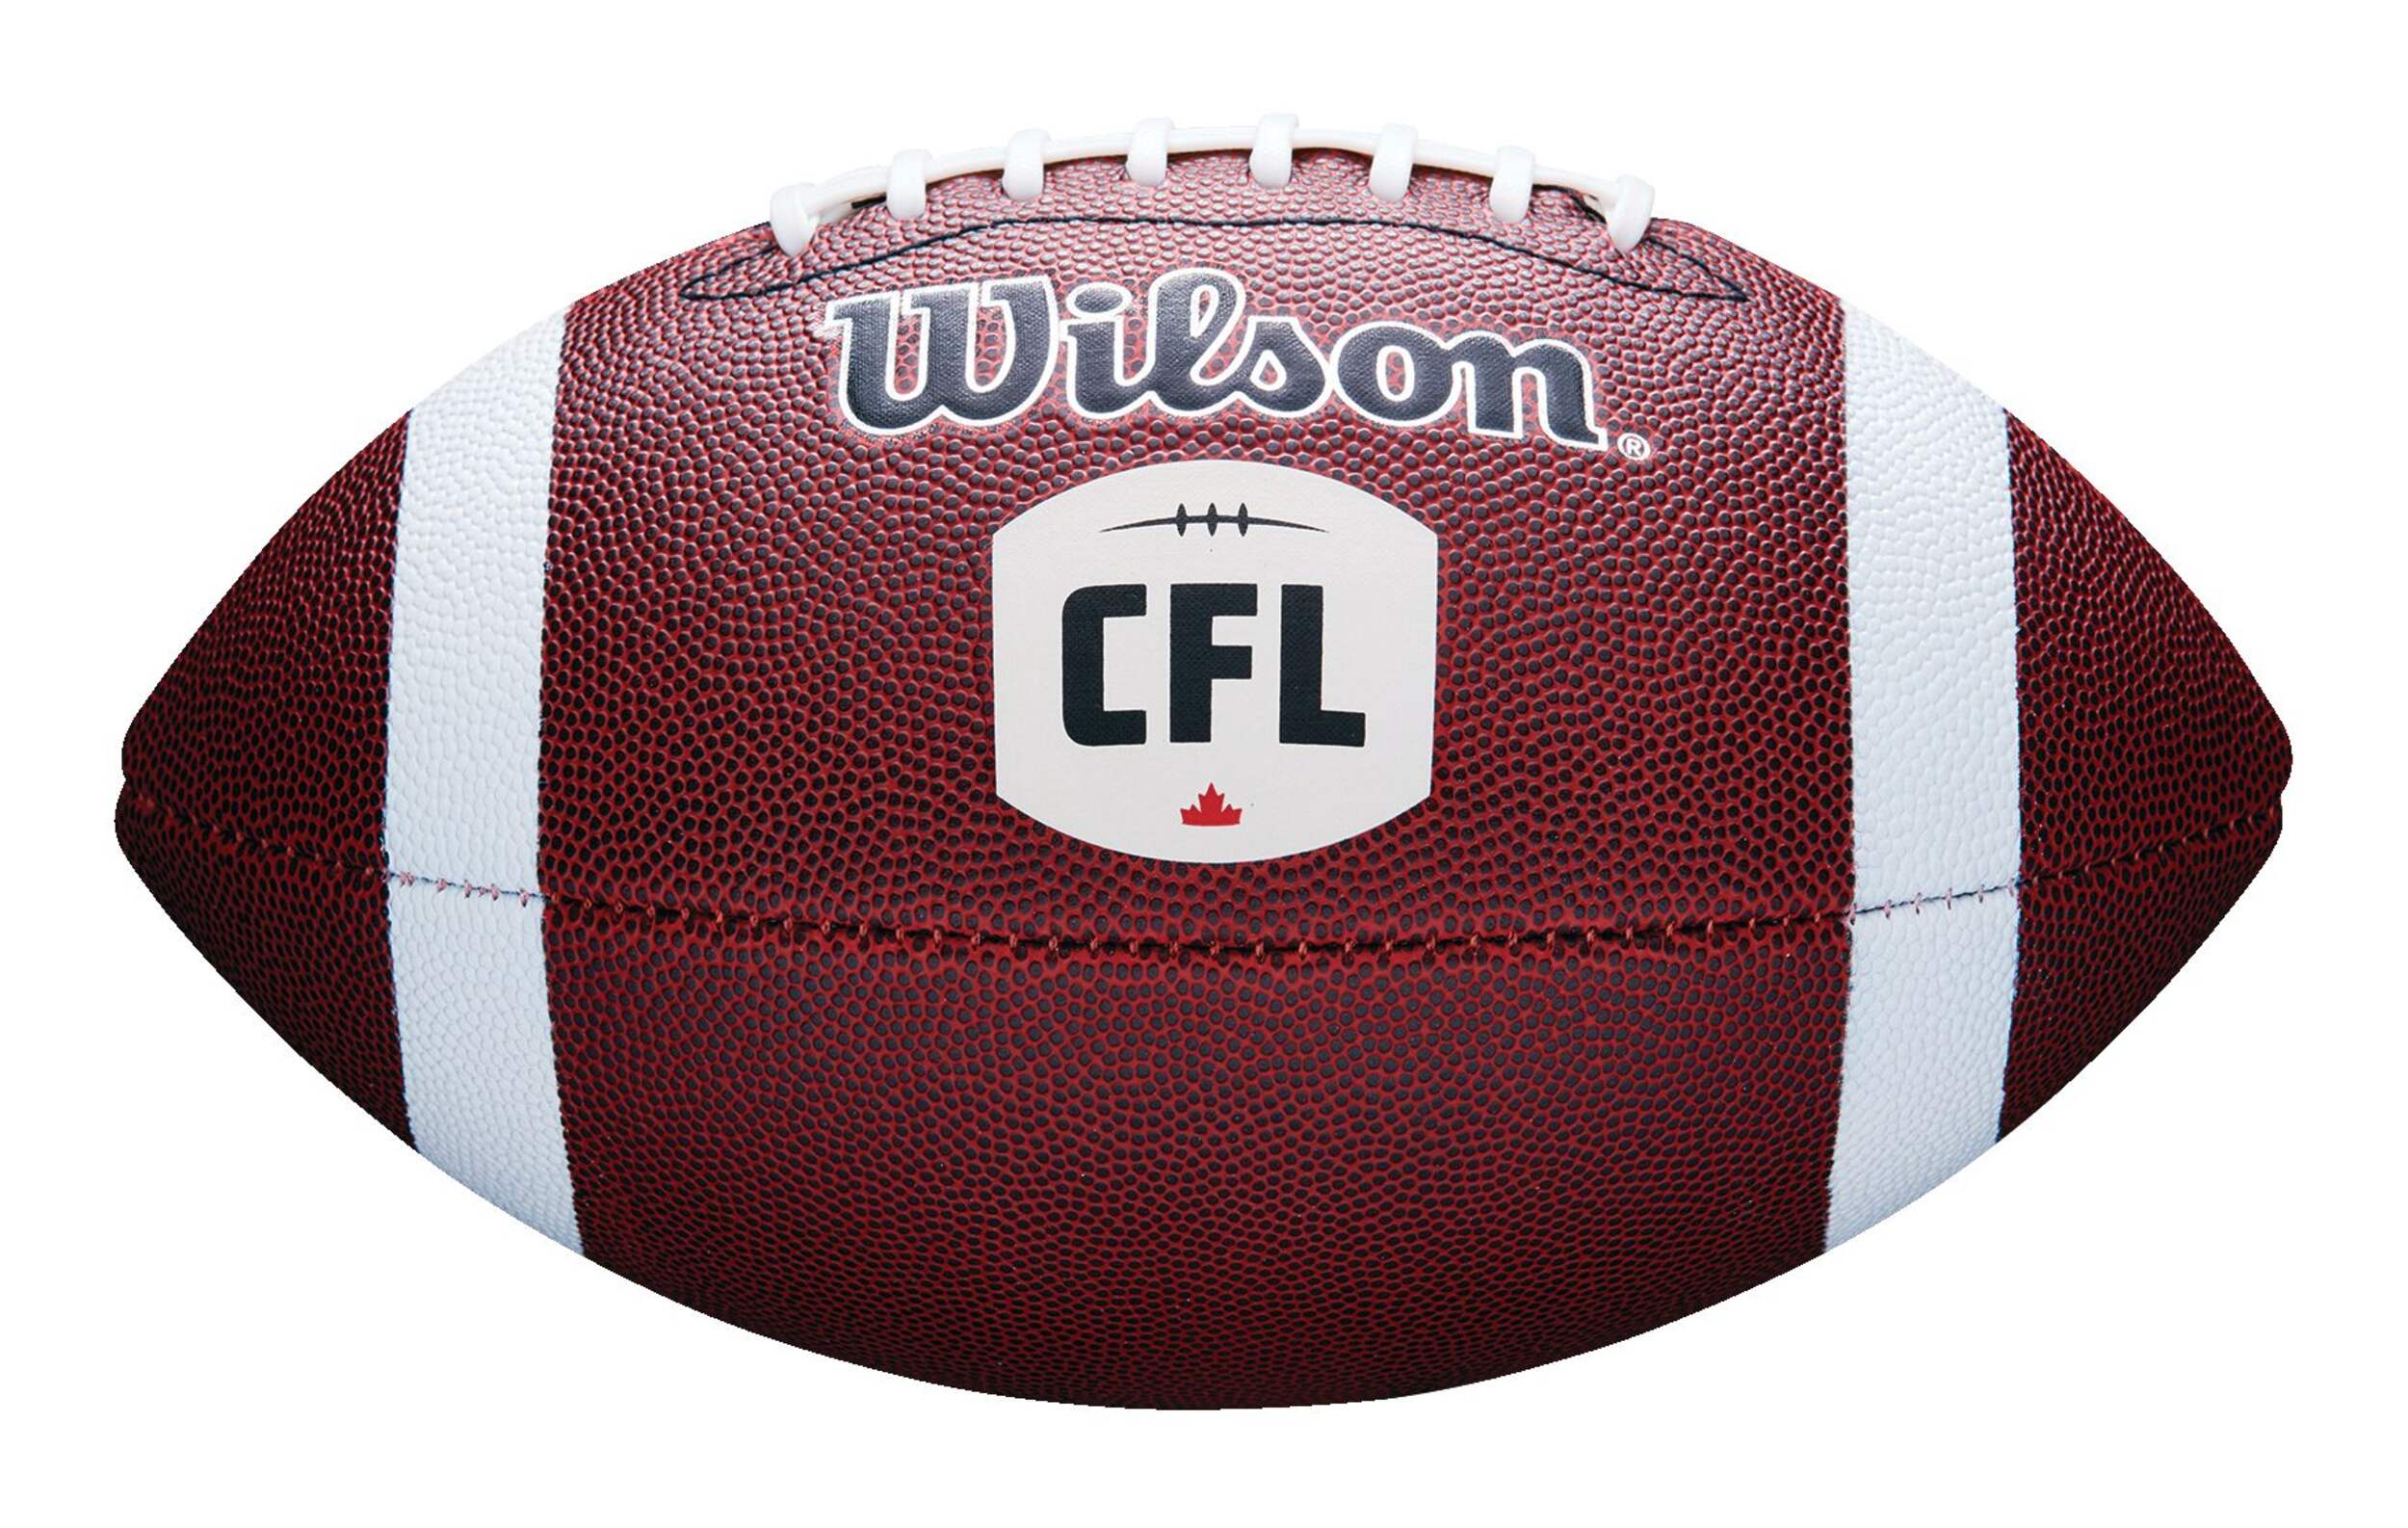 Wilson Cfl Mvp Football Official Size-Wilson-Sports Replay - Sports Excellence